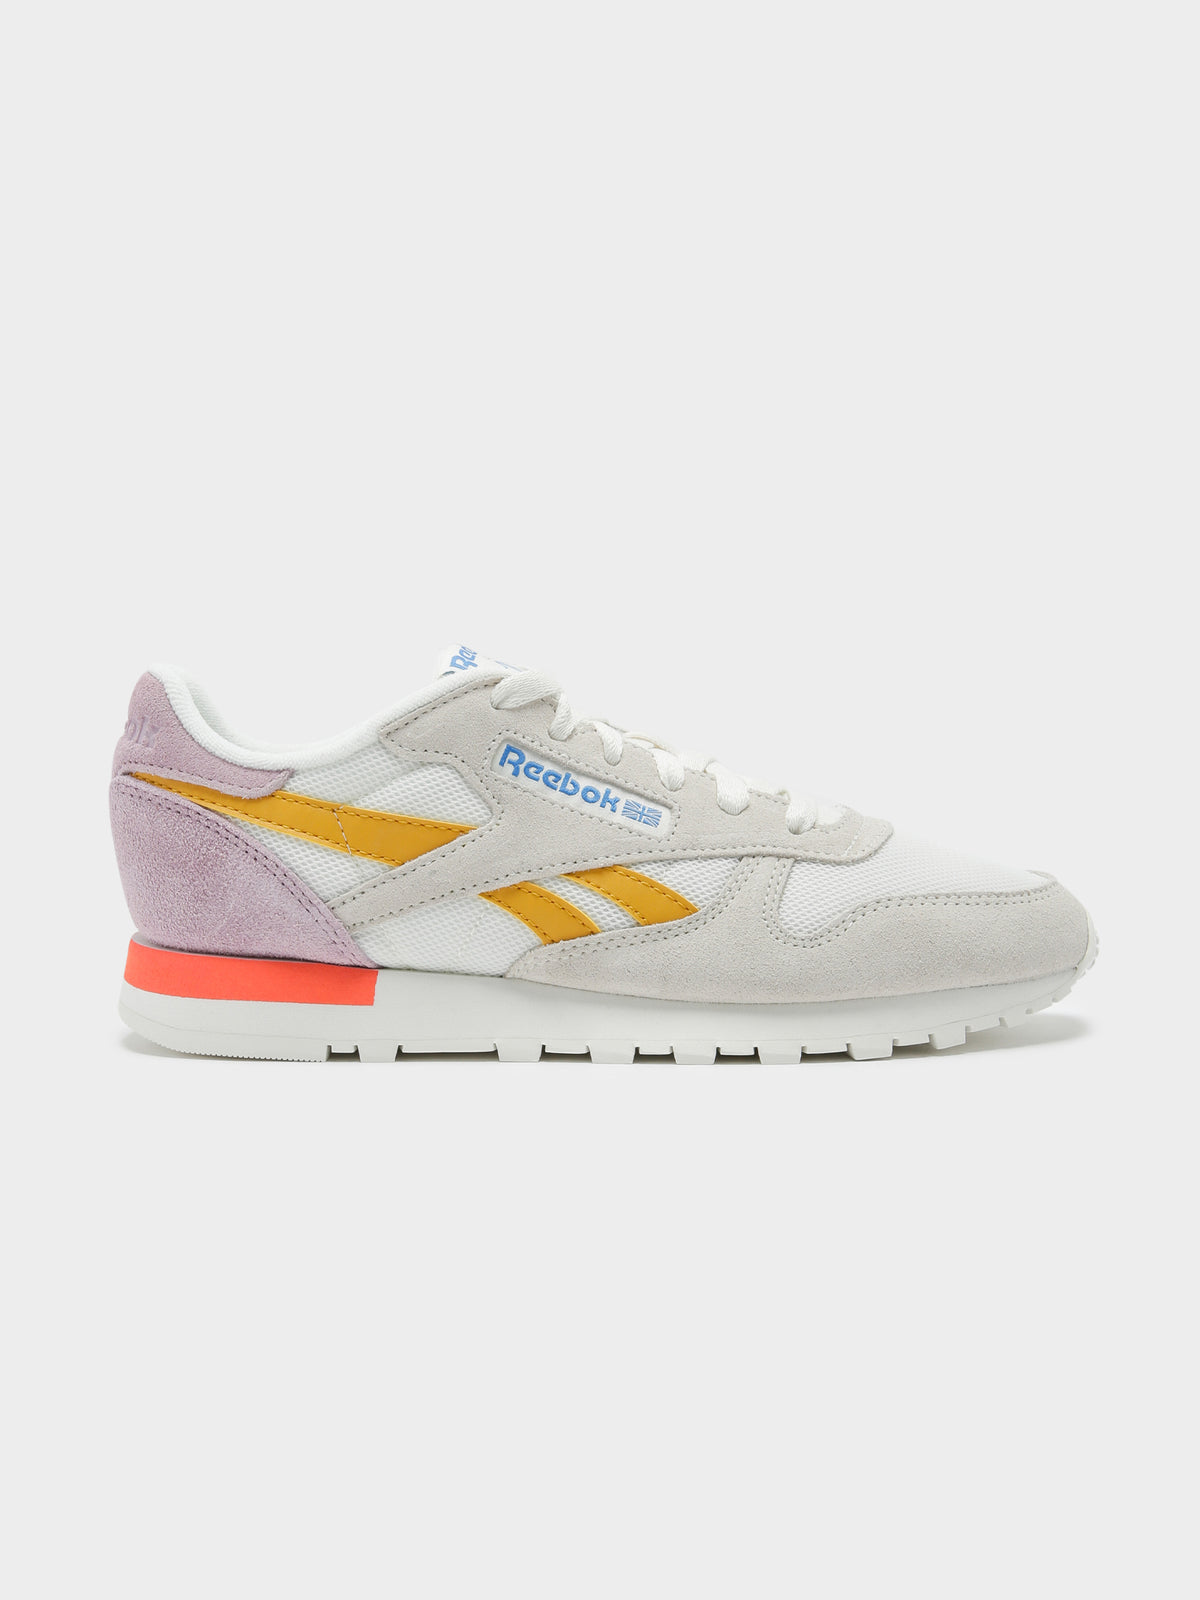 Womens Classic Leather Sneakers in Chalk, Ochre &amp; Lilac